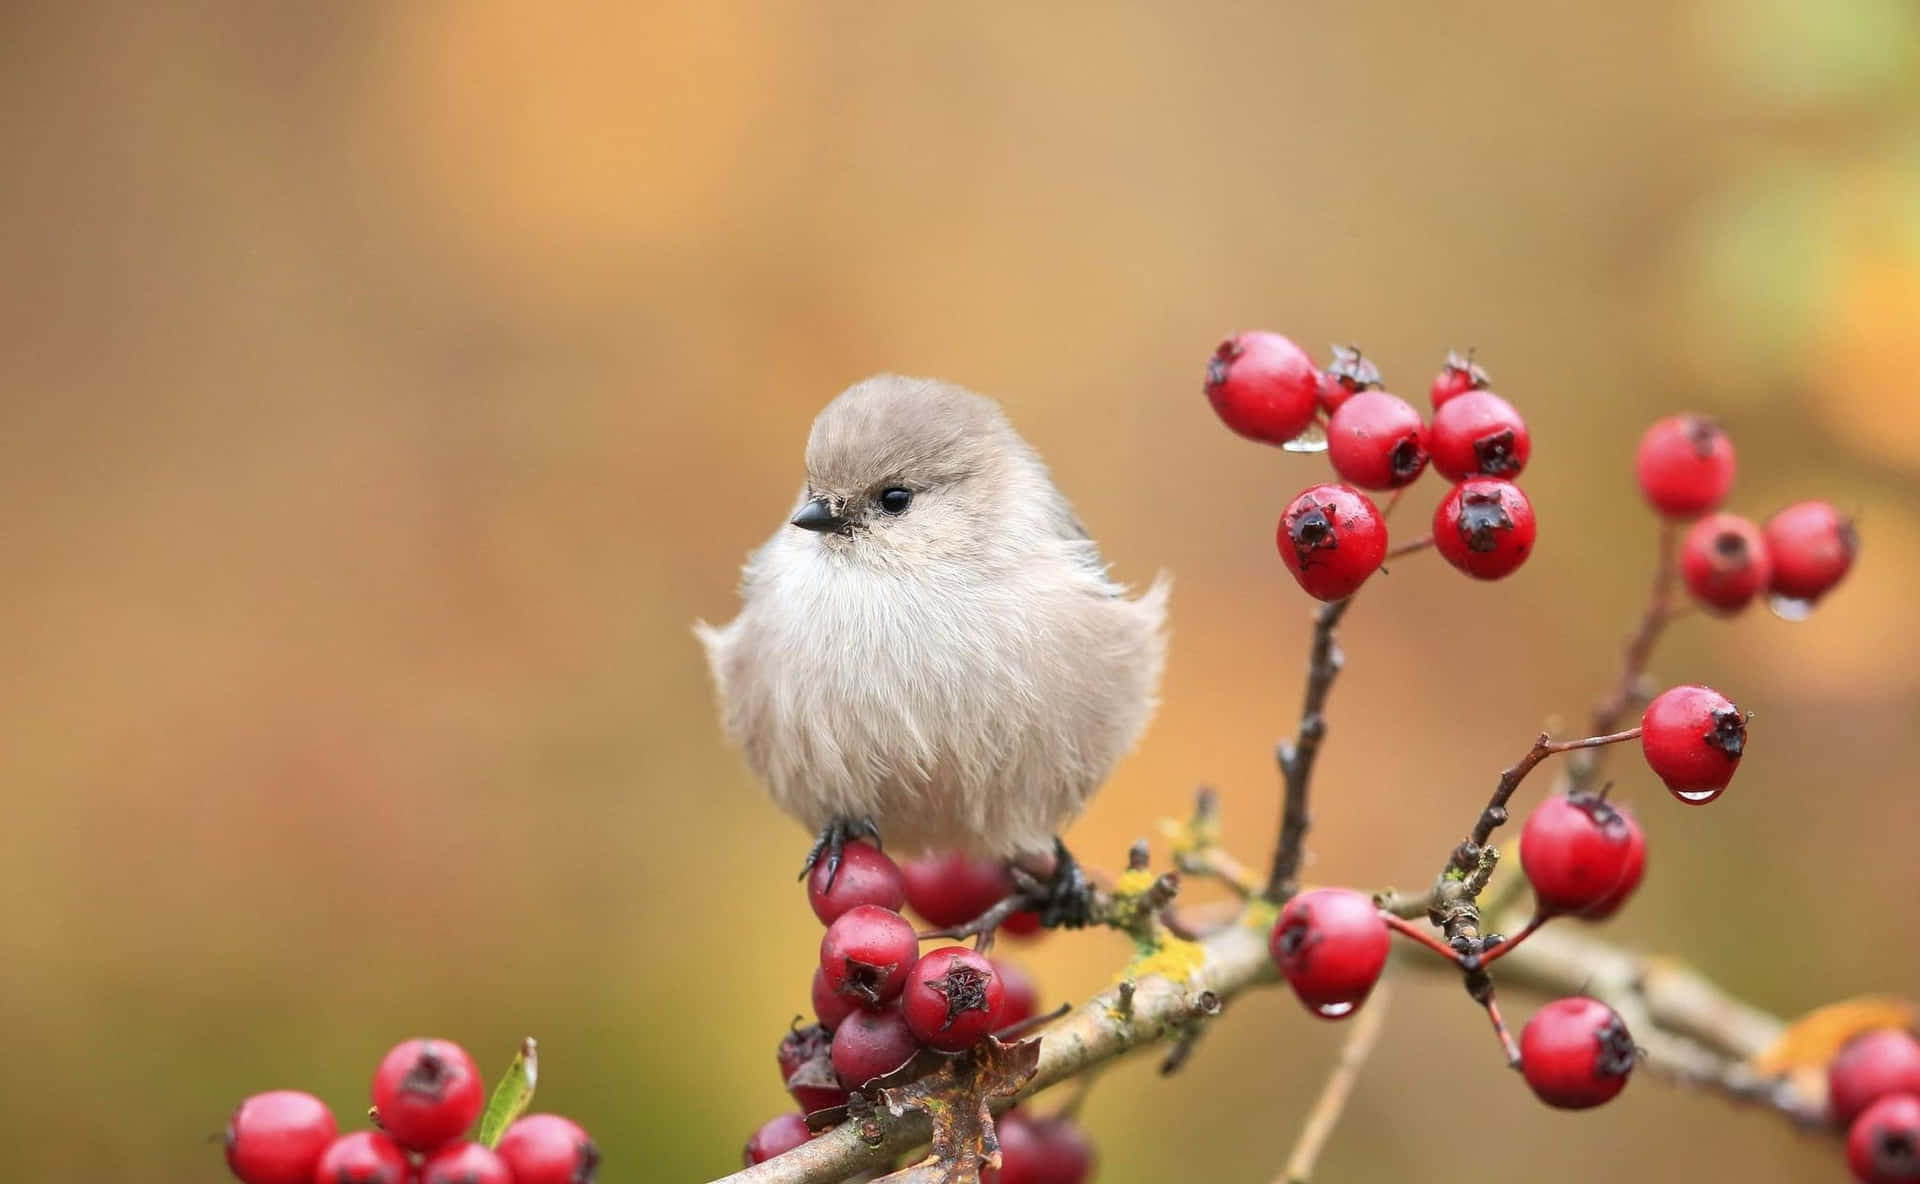 A Small Bird Is Sitting On A Branch With Red Berries